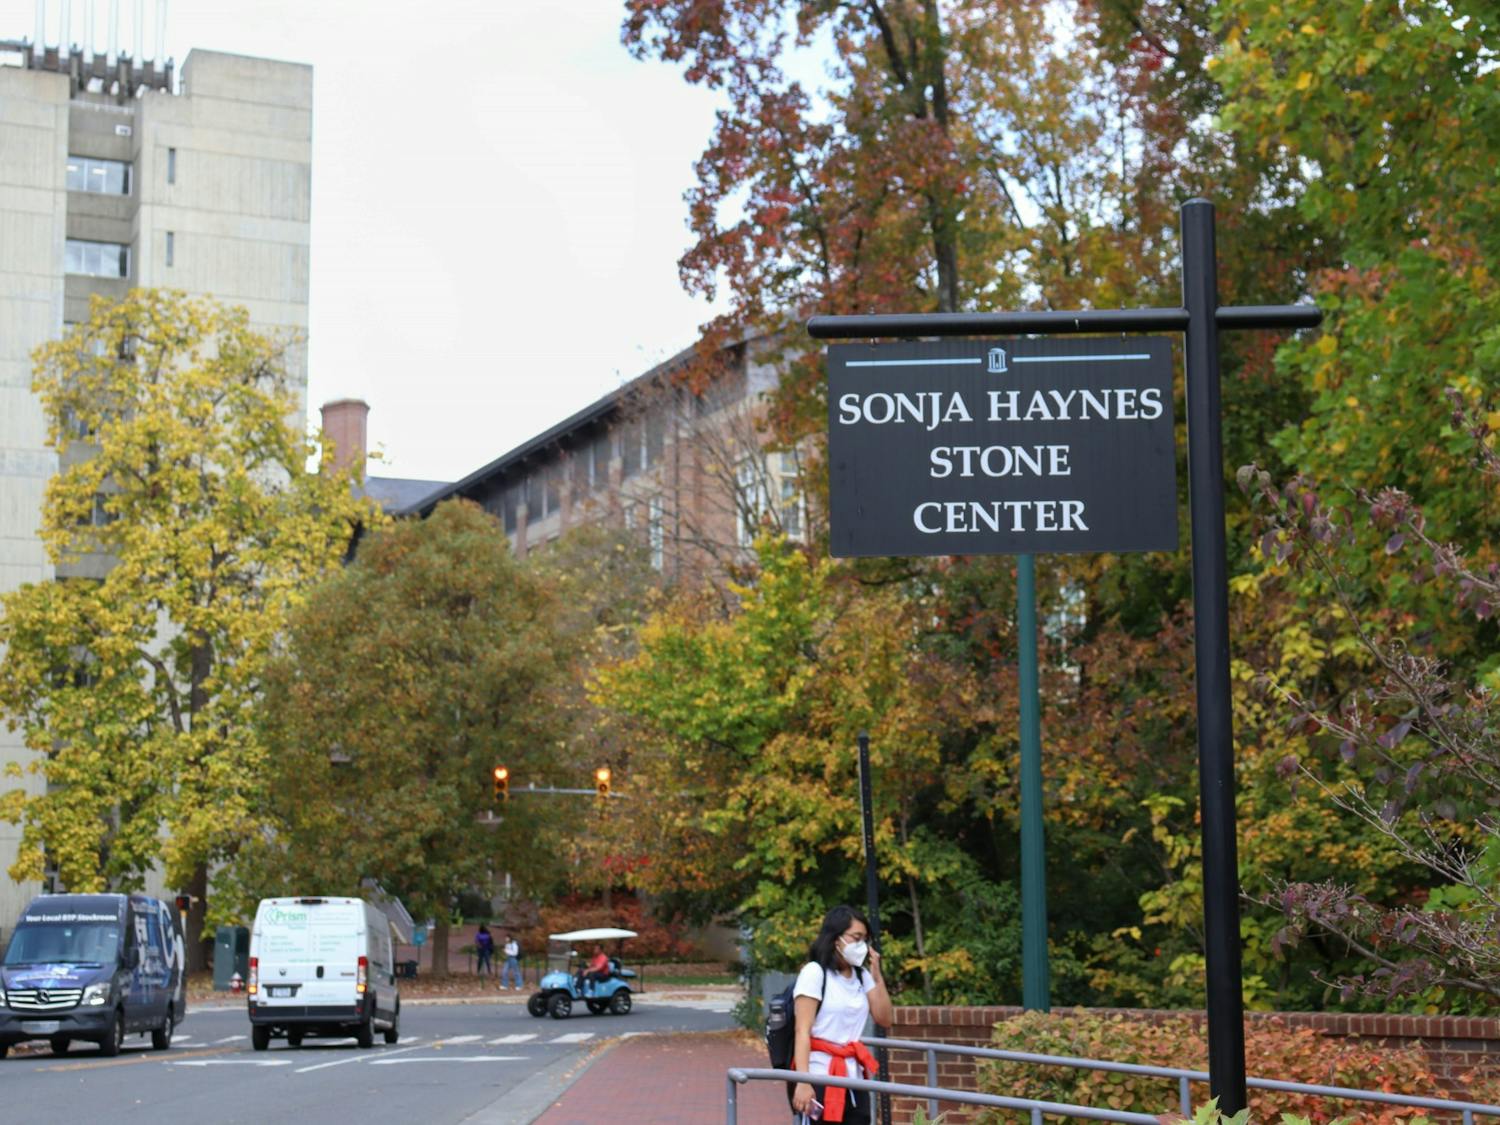 Cars pass by the Sonja Haynes Stone Center, which will be the main voting location on UNC's campus on election day. Pictured on Monday, Oct. 31, 2022.